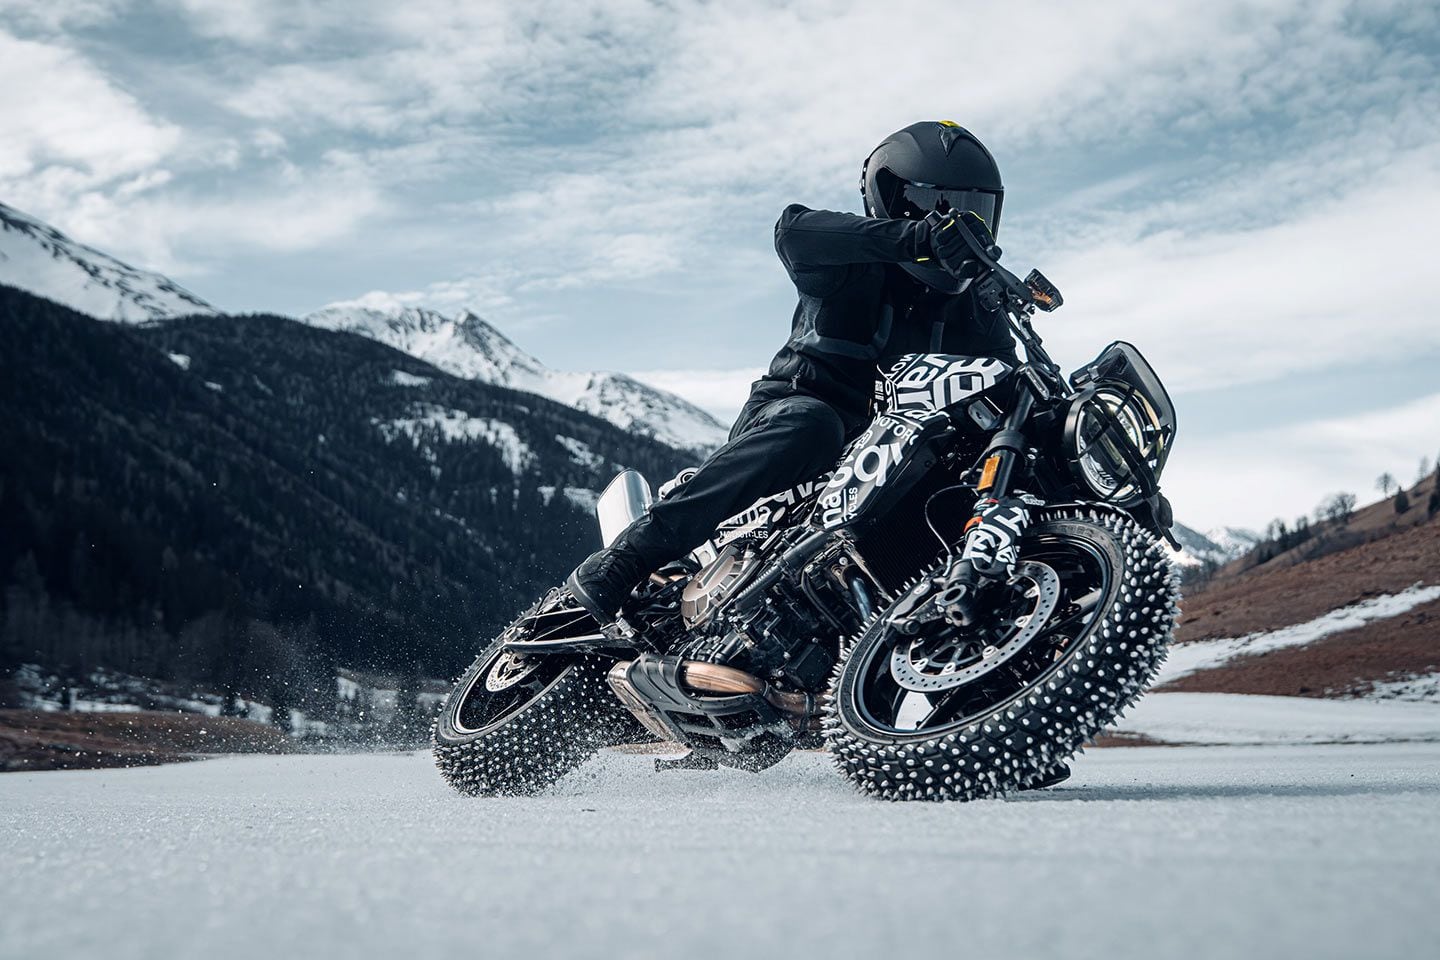 Pretty sure we aren’t going to get spiked ice tires on the new Svartpilen 801, but dang, that looks fun.